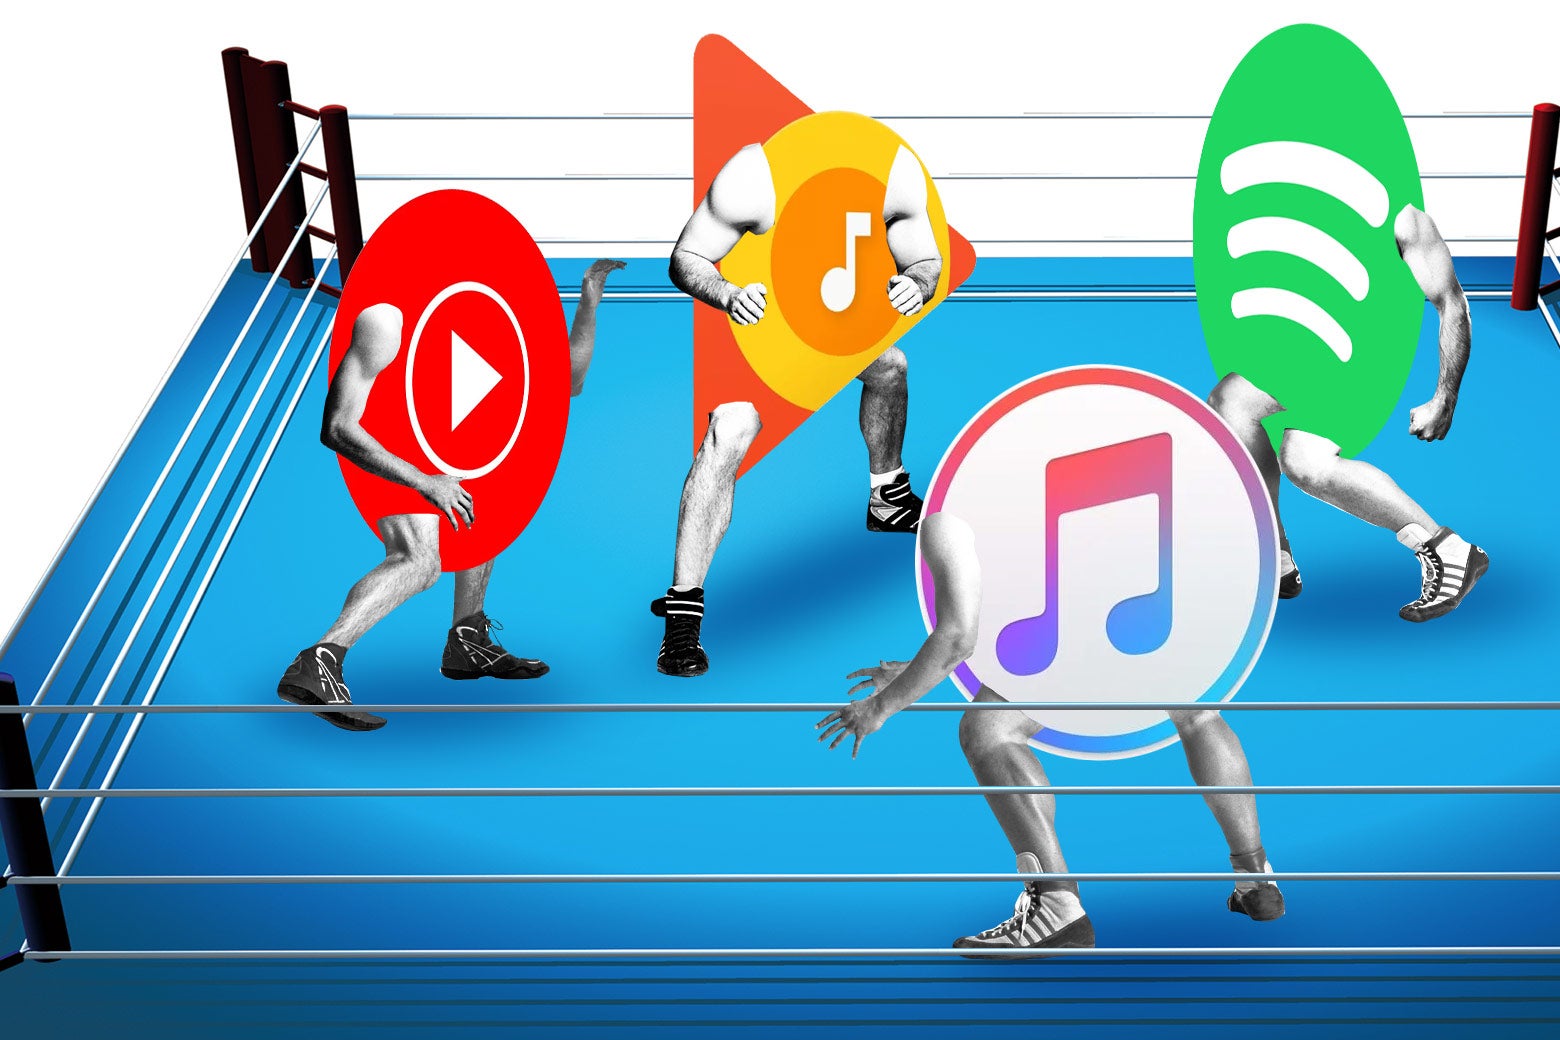 YouTube, Google Play, Spotify, and Apple logos wrestling.